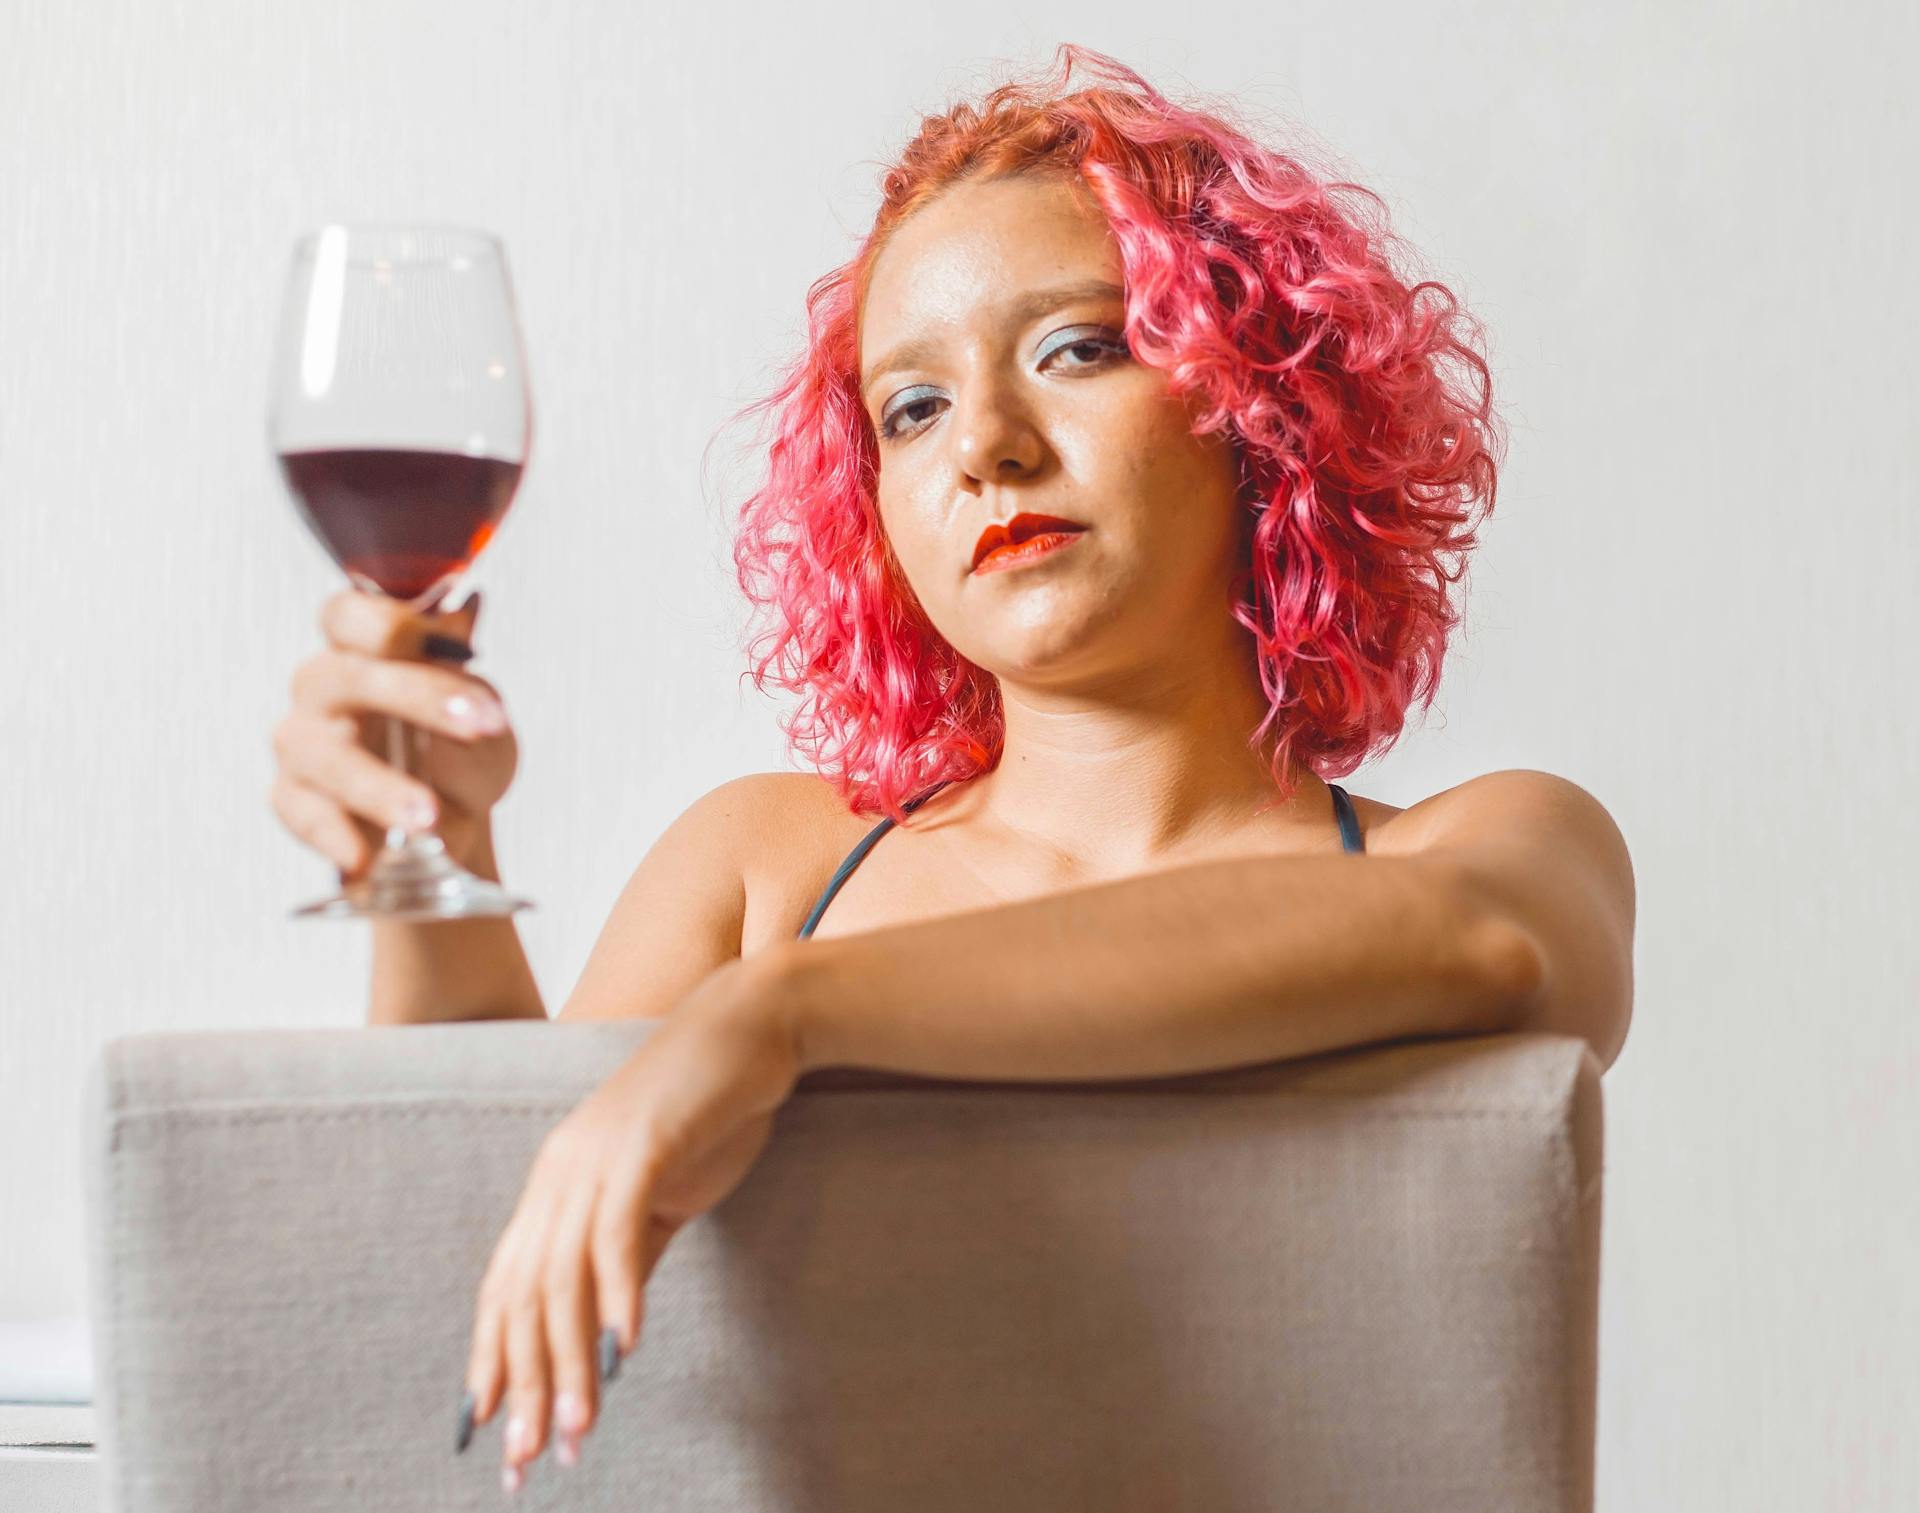 Woman Posing with Wine Glass